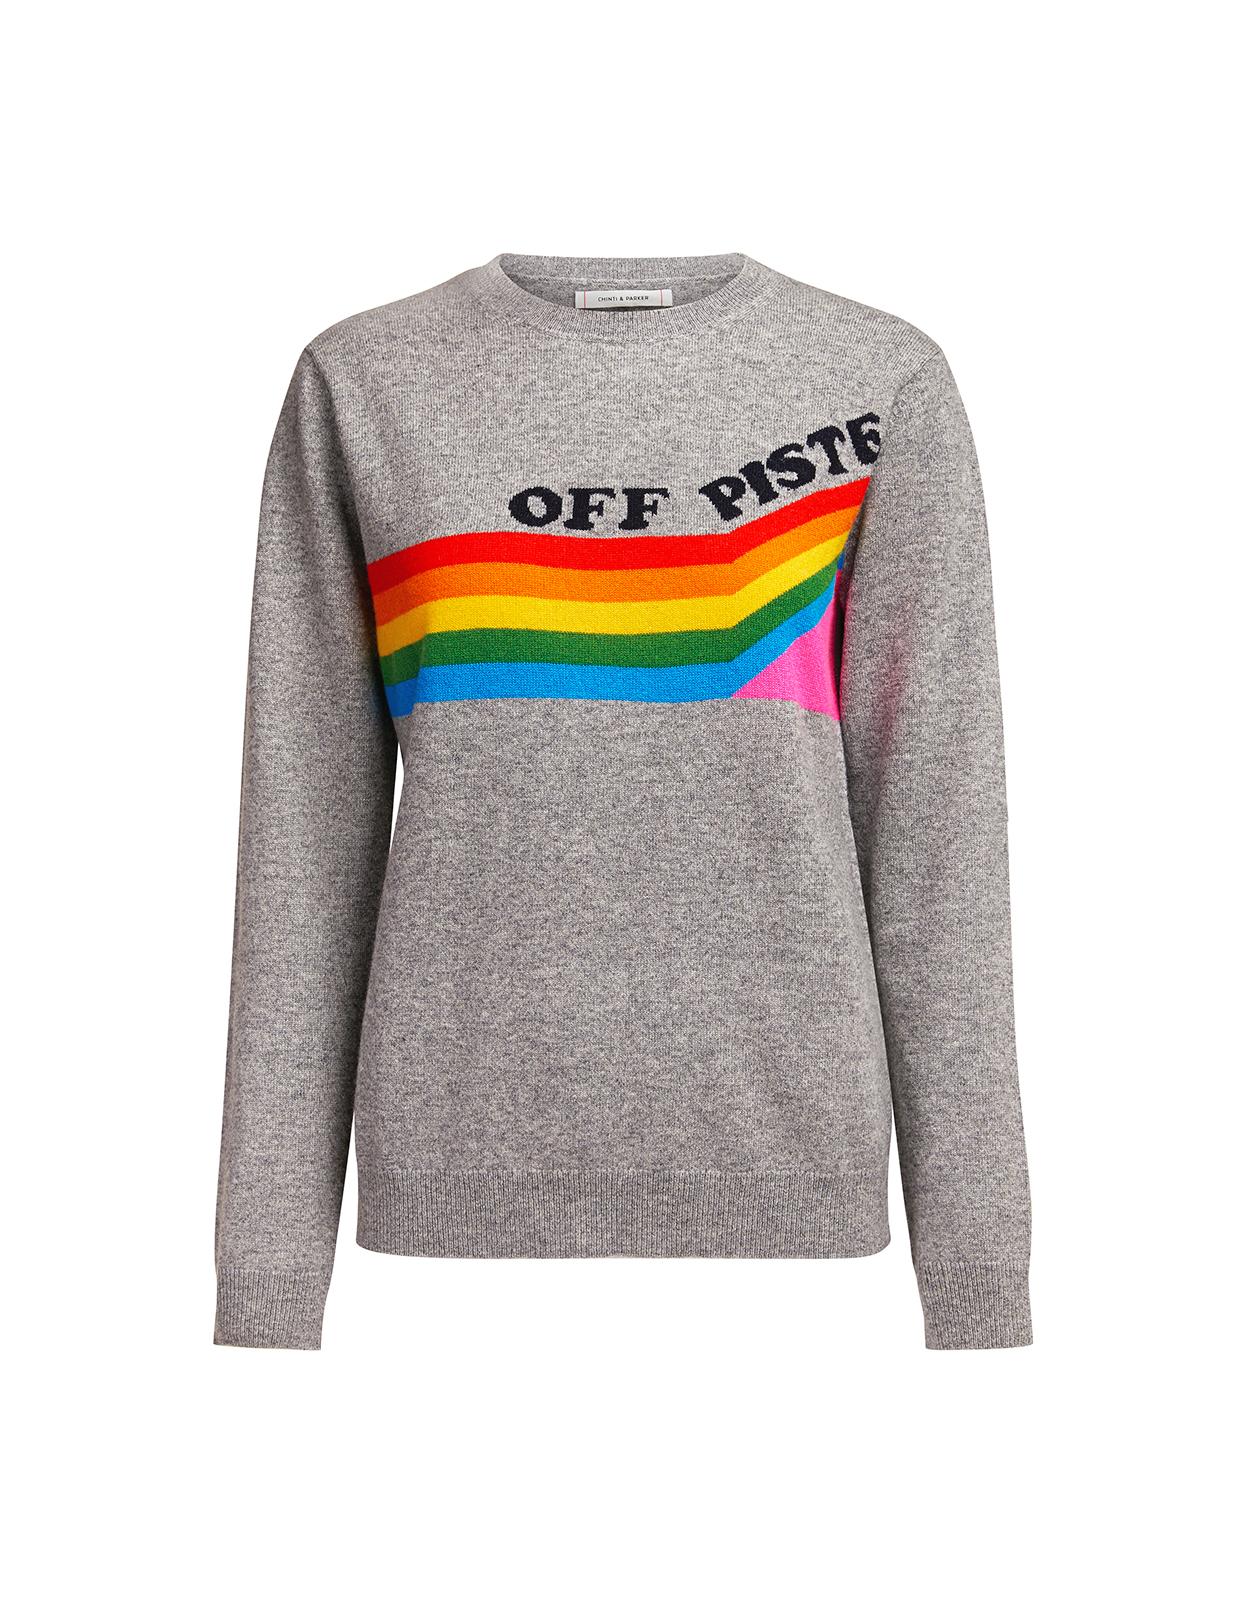 Chinti & Parker Off Piste Rainbow Cashmere-blend Sweater in Grey (Gray ...